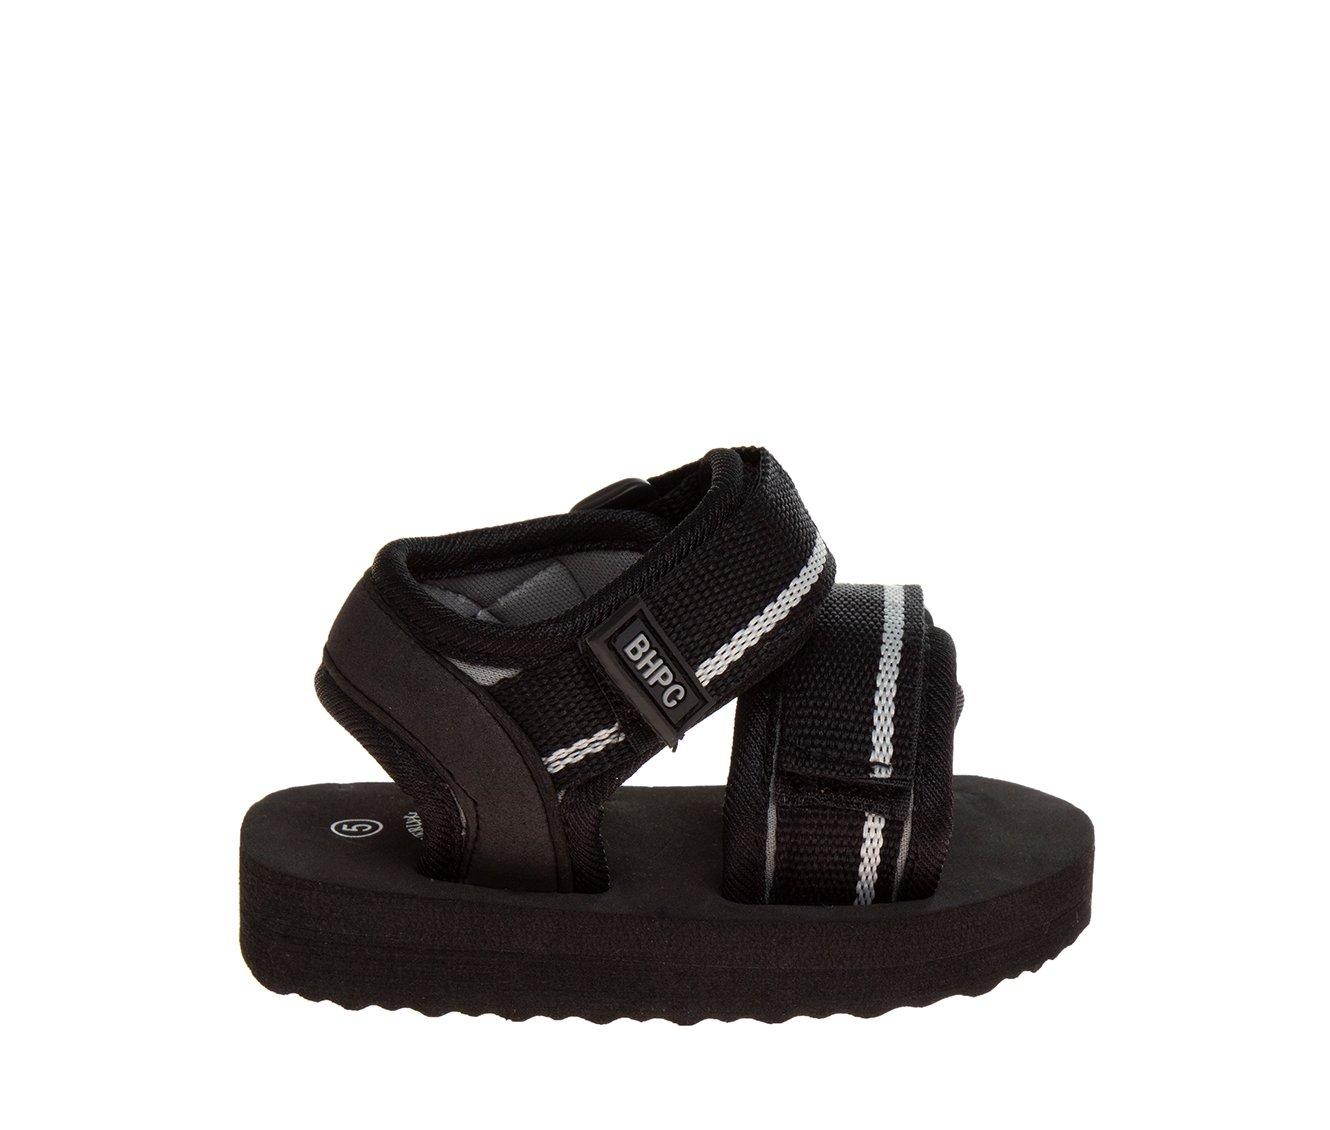 Boys' Beverly Hills Polo Club Toddler Swallow Sandals